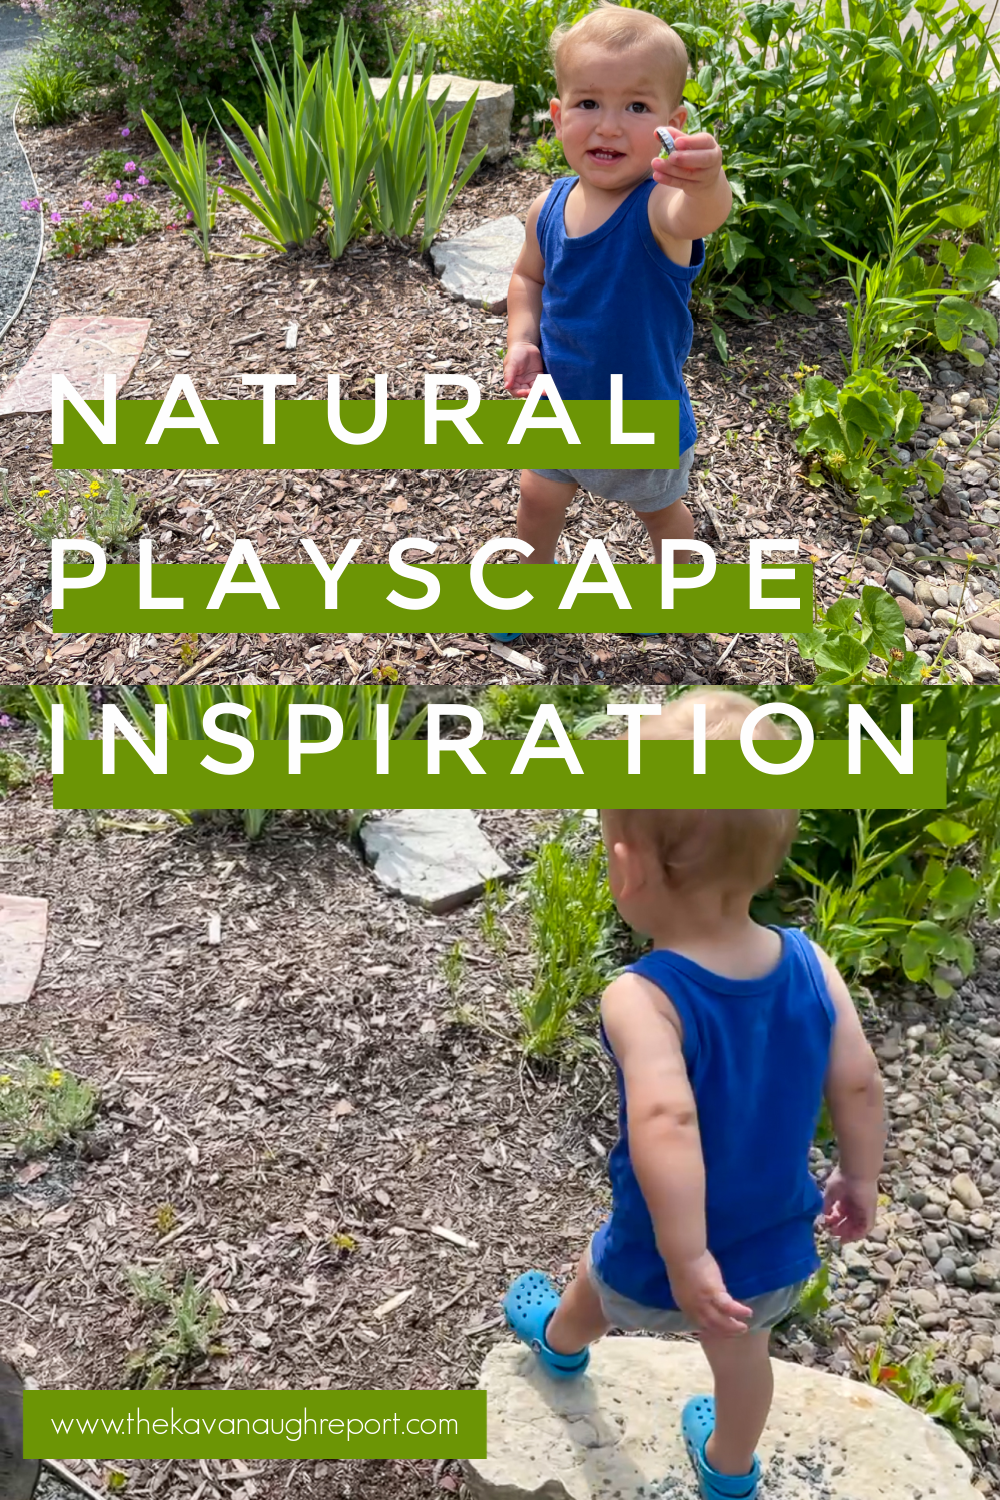 Here is some inspiration for a Montessori inspired natural playscape and backyard playground.